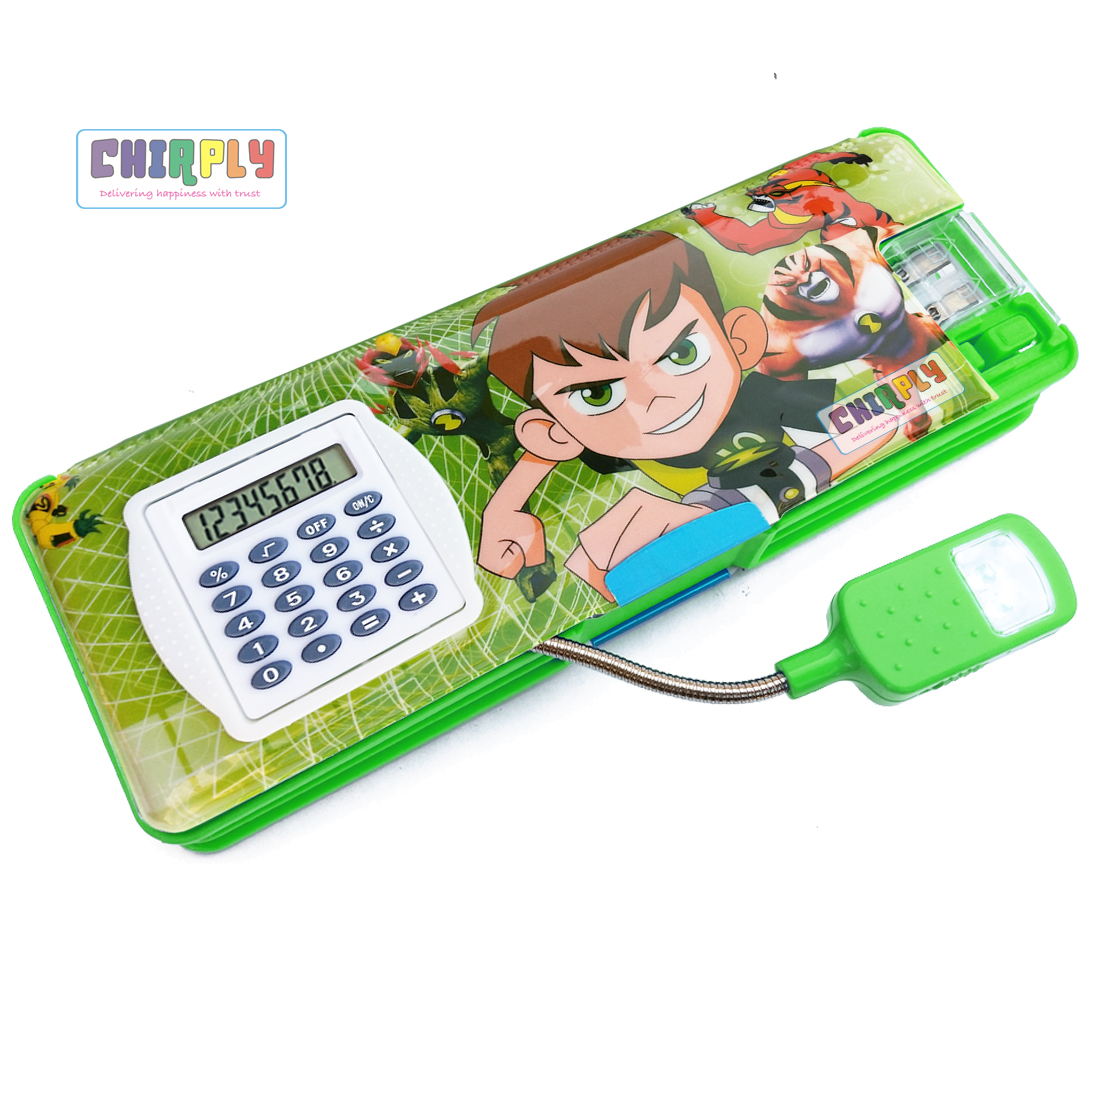 CHIRPLY School Pencil Box with Calculator and LED Light as Kids Toys